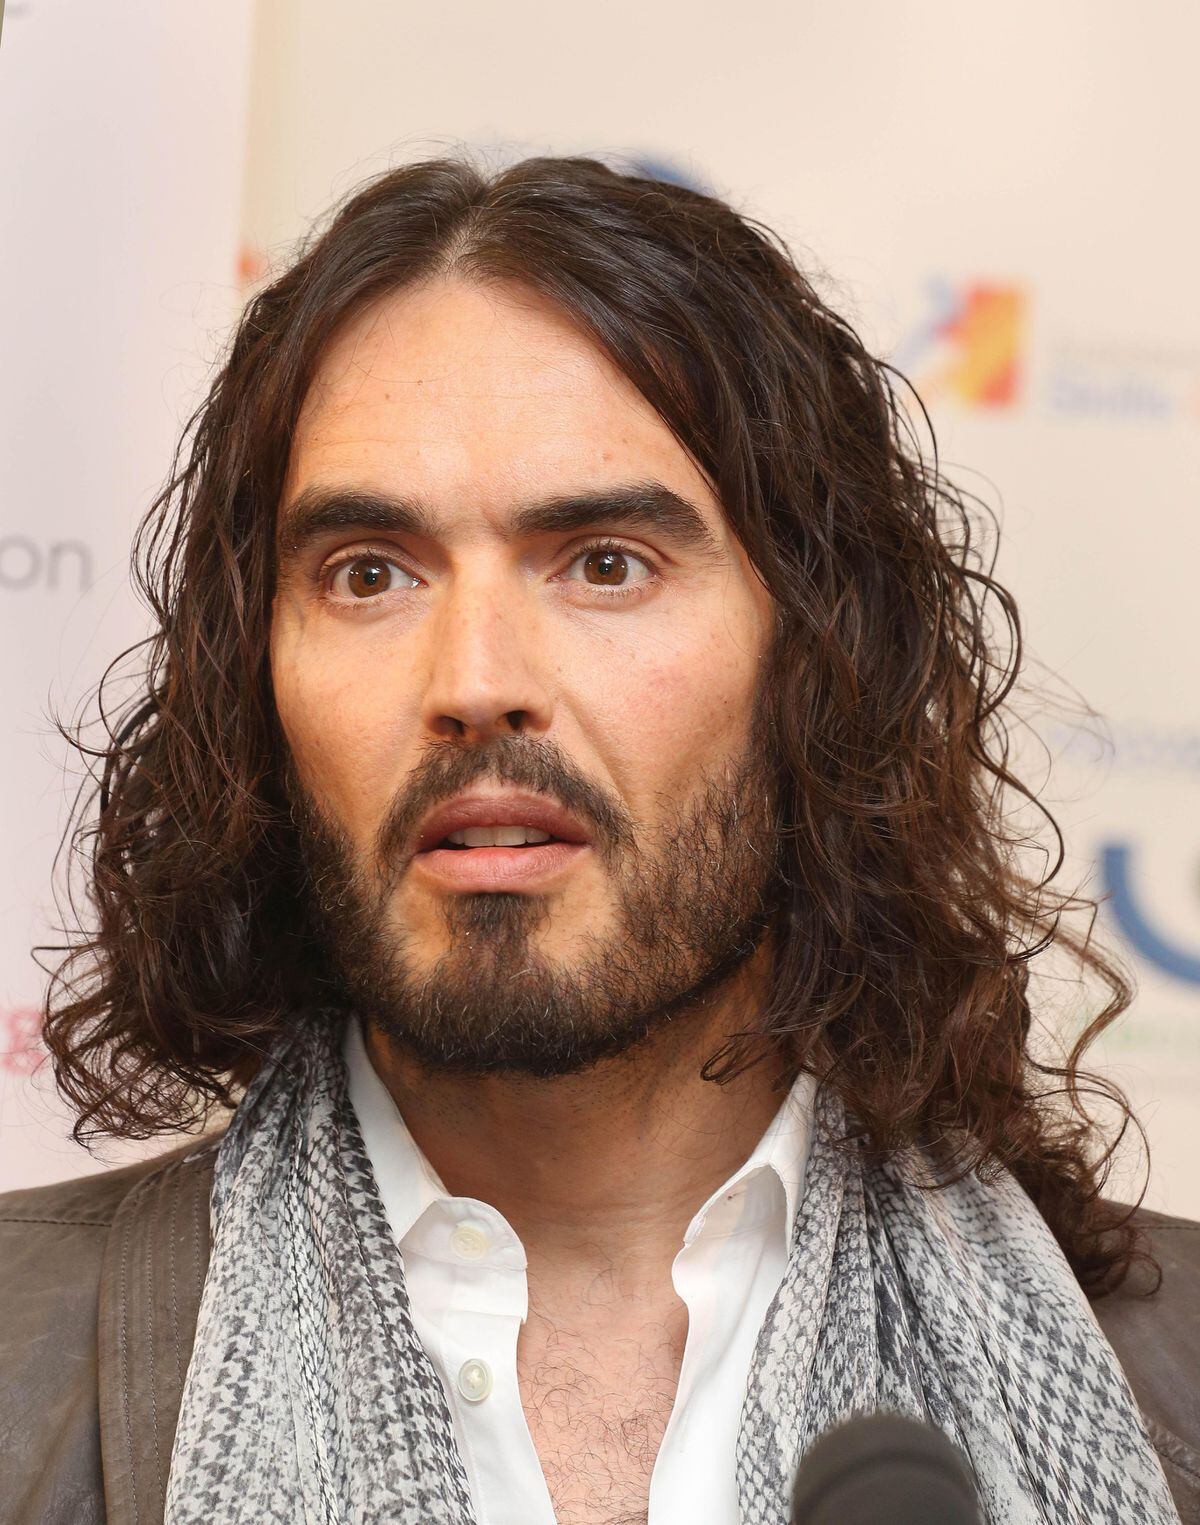 Russell Brand's upcoming tour dates have been postponed in the wake of sexual assault allegations made against the 48-year-old. Photo: Philip Toscano/PA Wire.